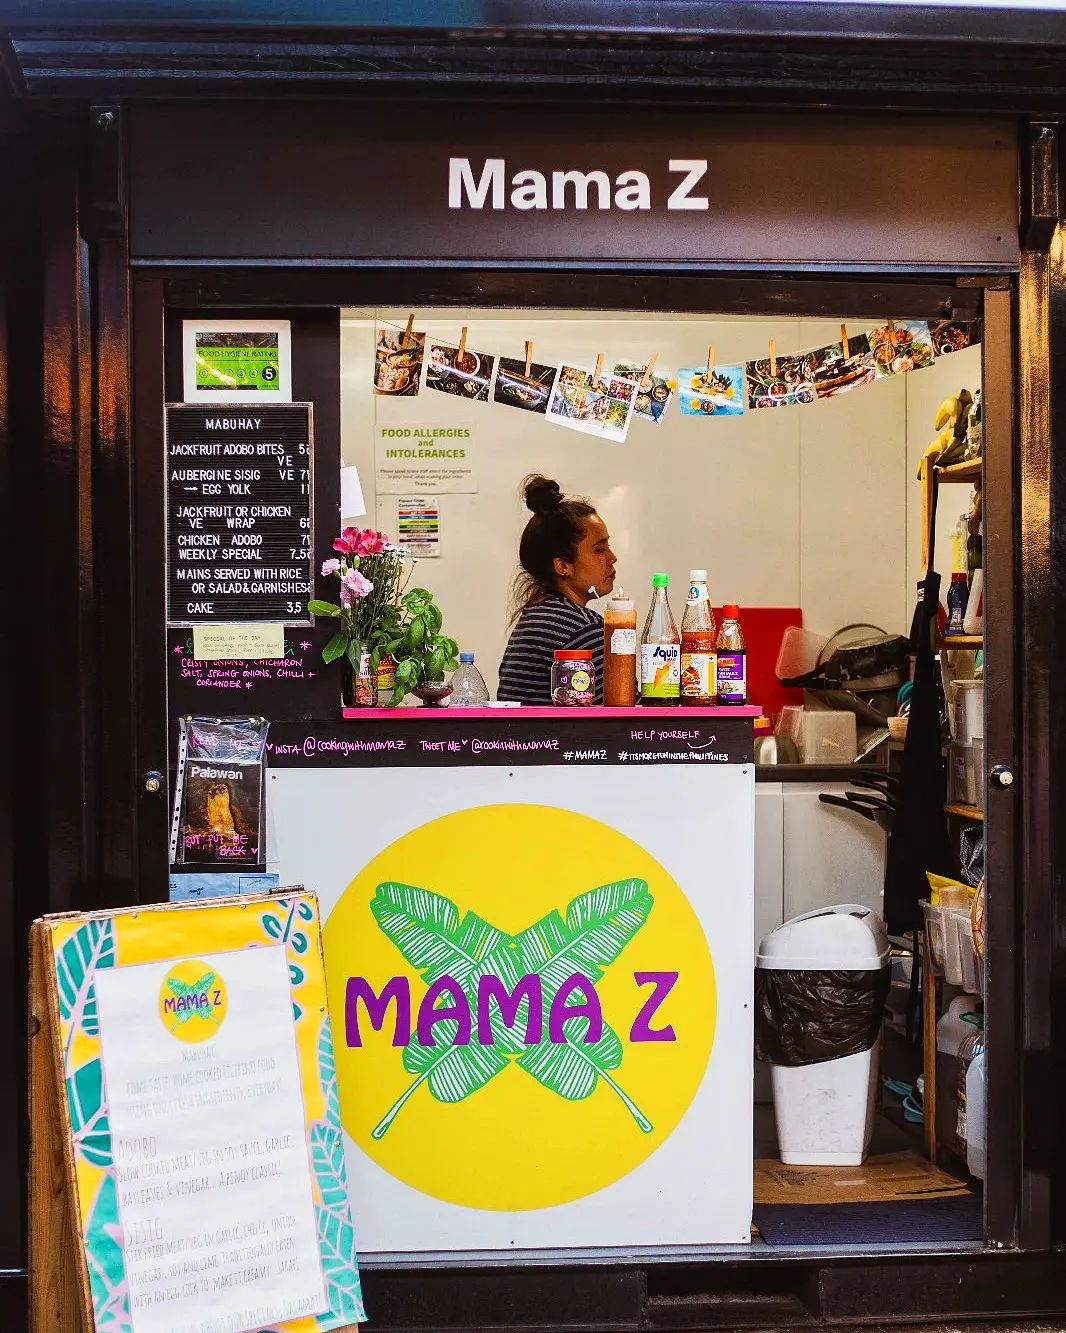 Mama Z and Woks Cluckin to open new cafe and shop Yes Lah! in Didsbury, The Manc